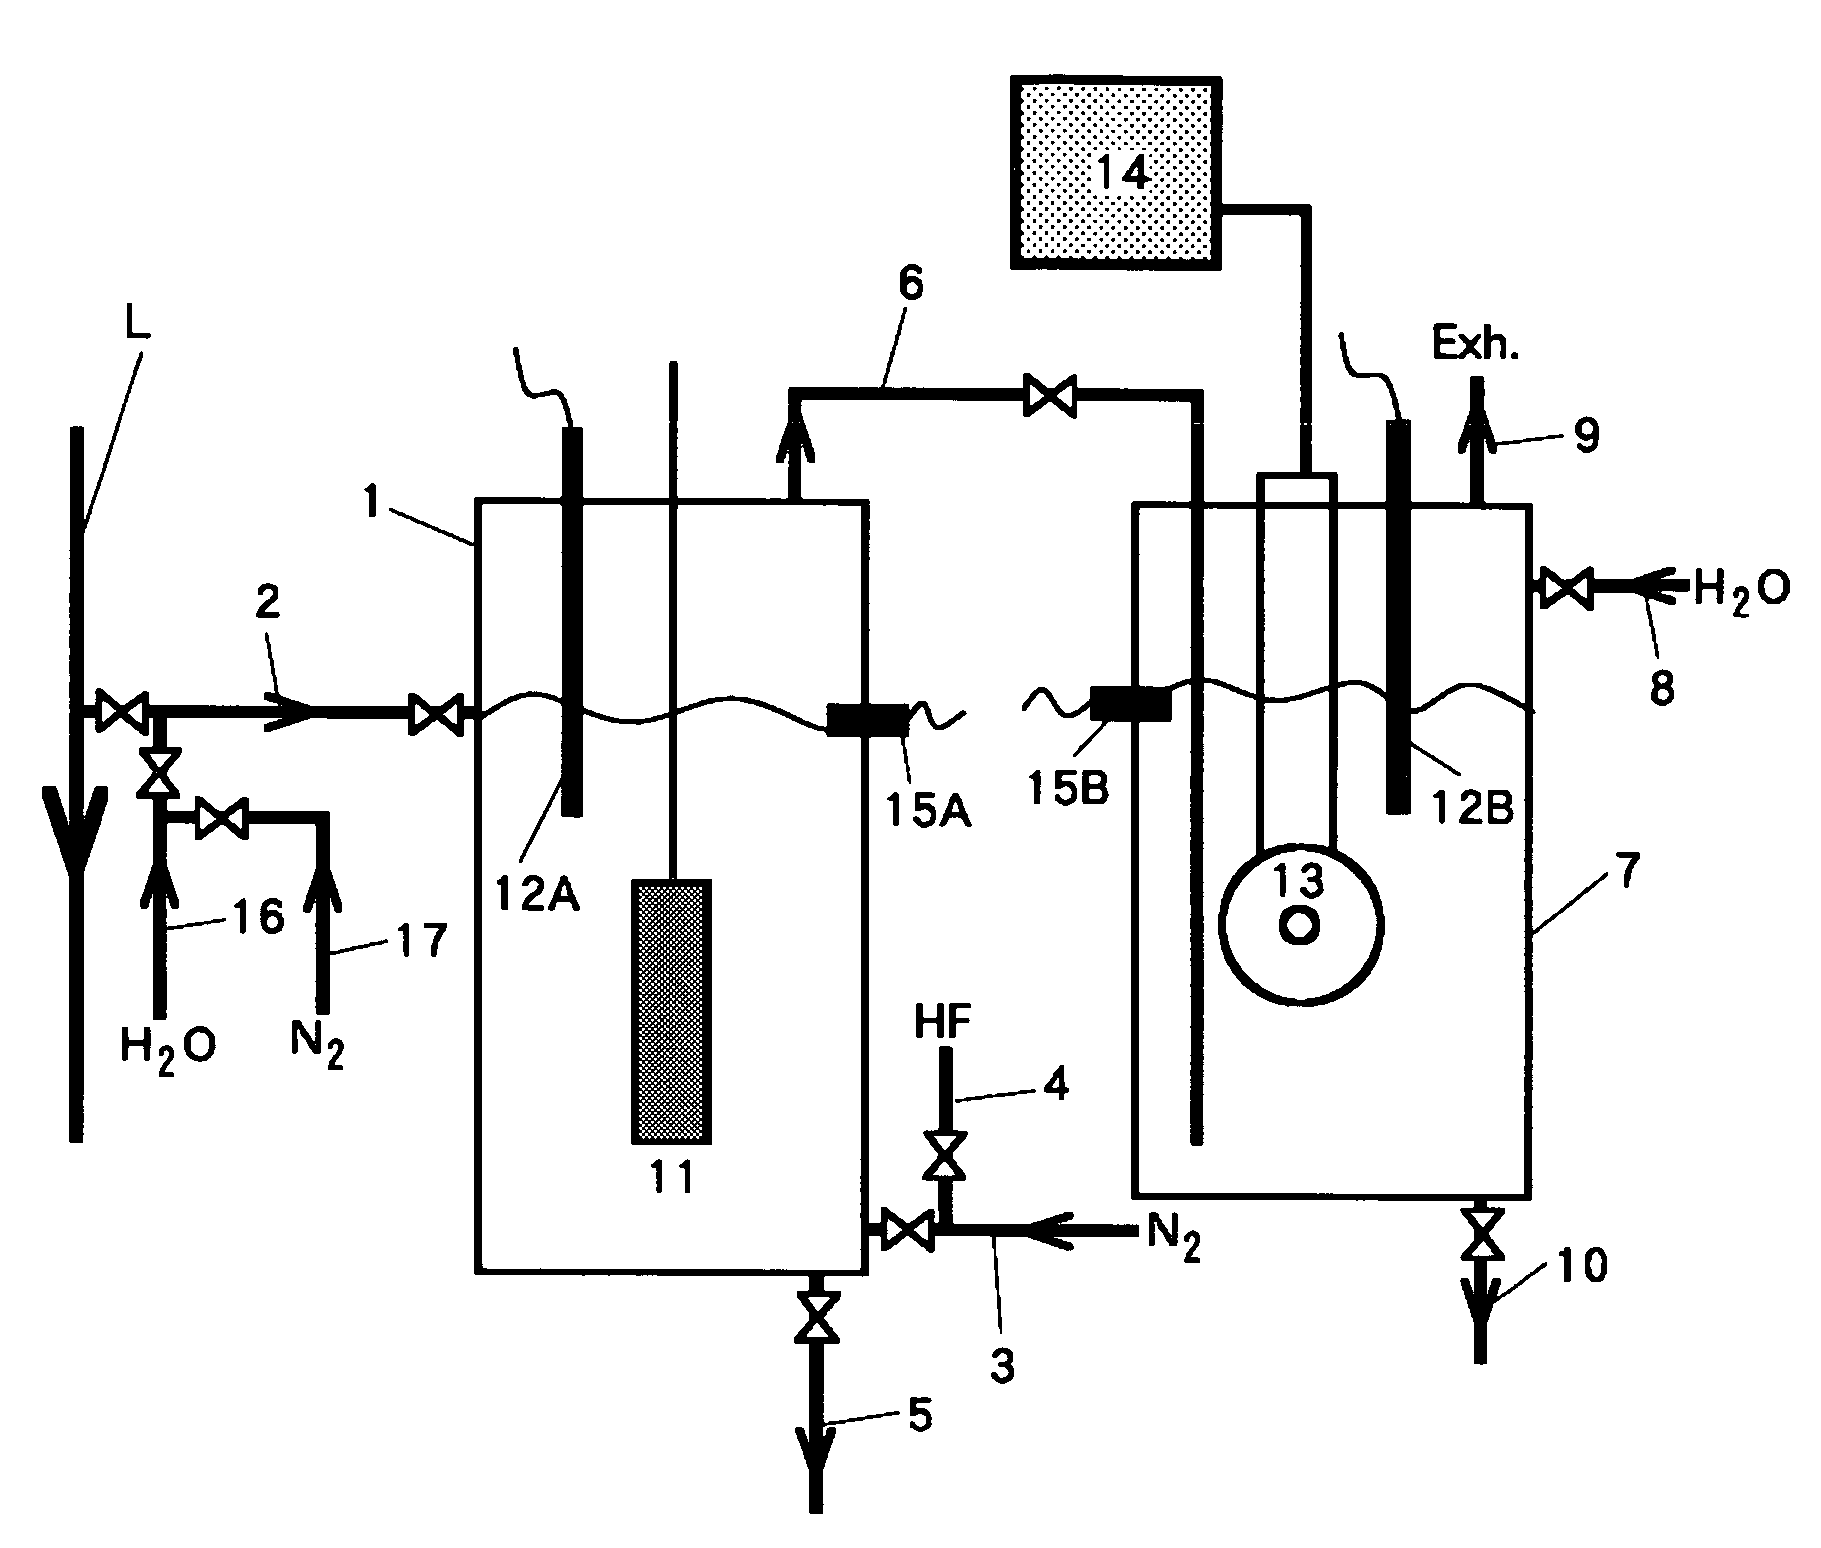 Equipment and method for measuring silicon concentration in phosphoric acid solution